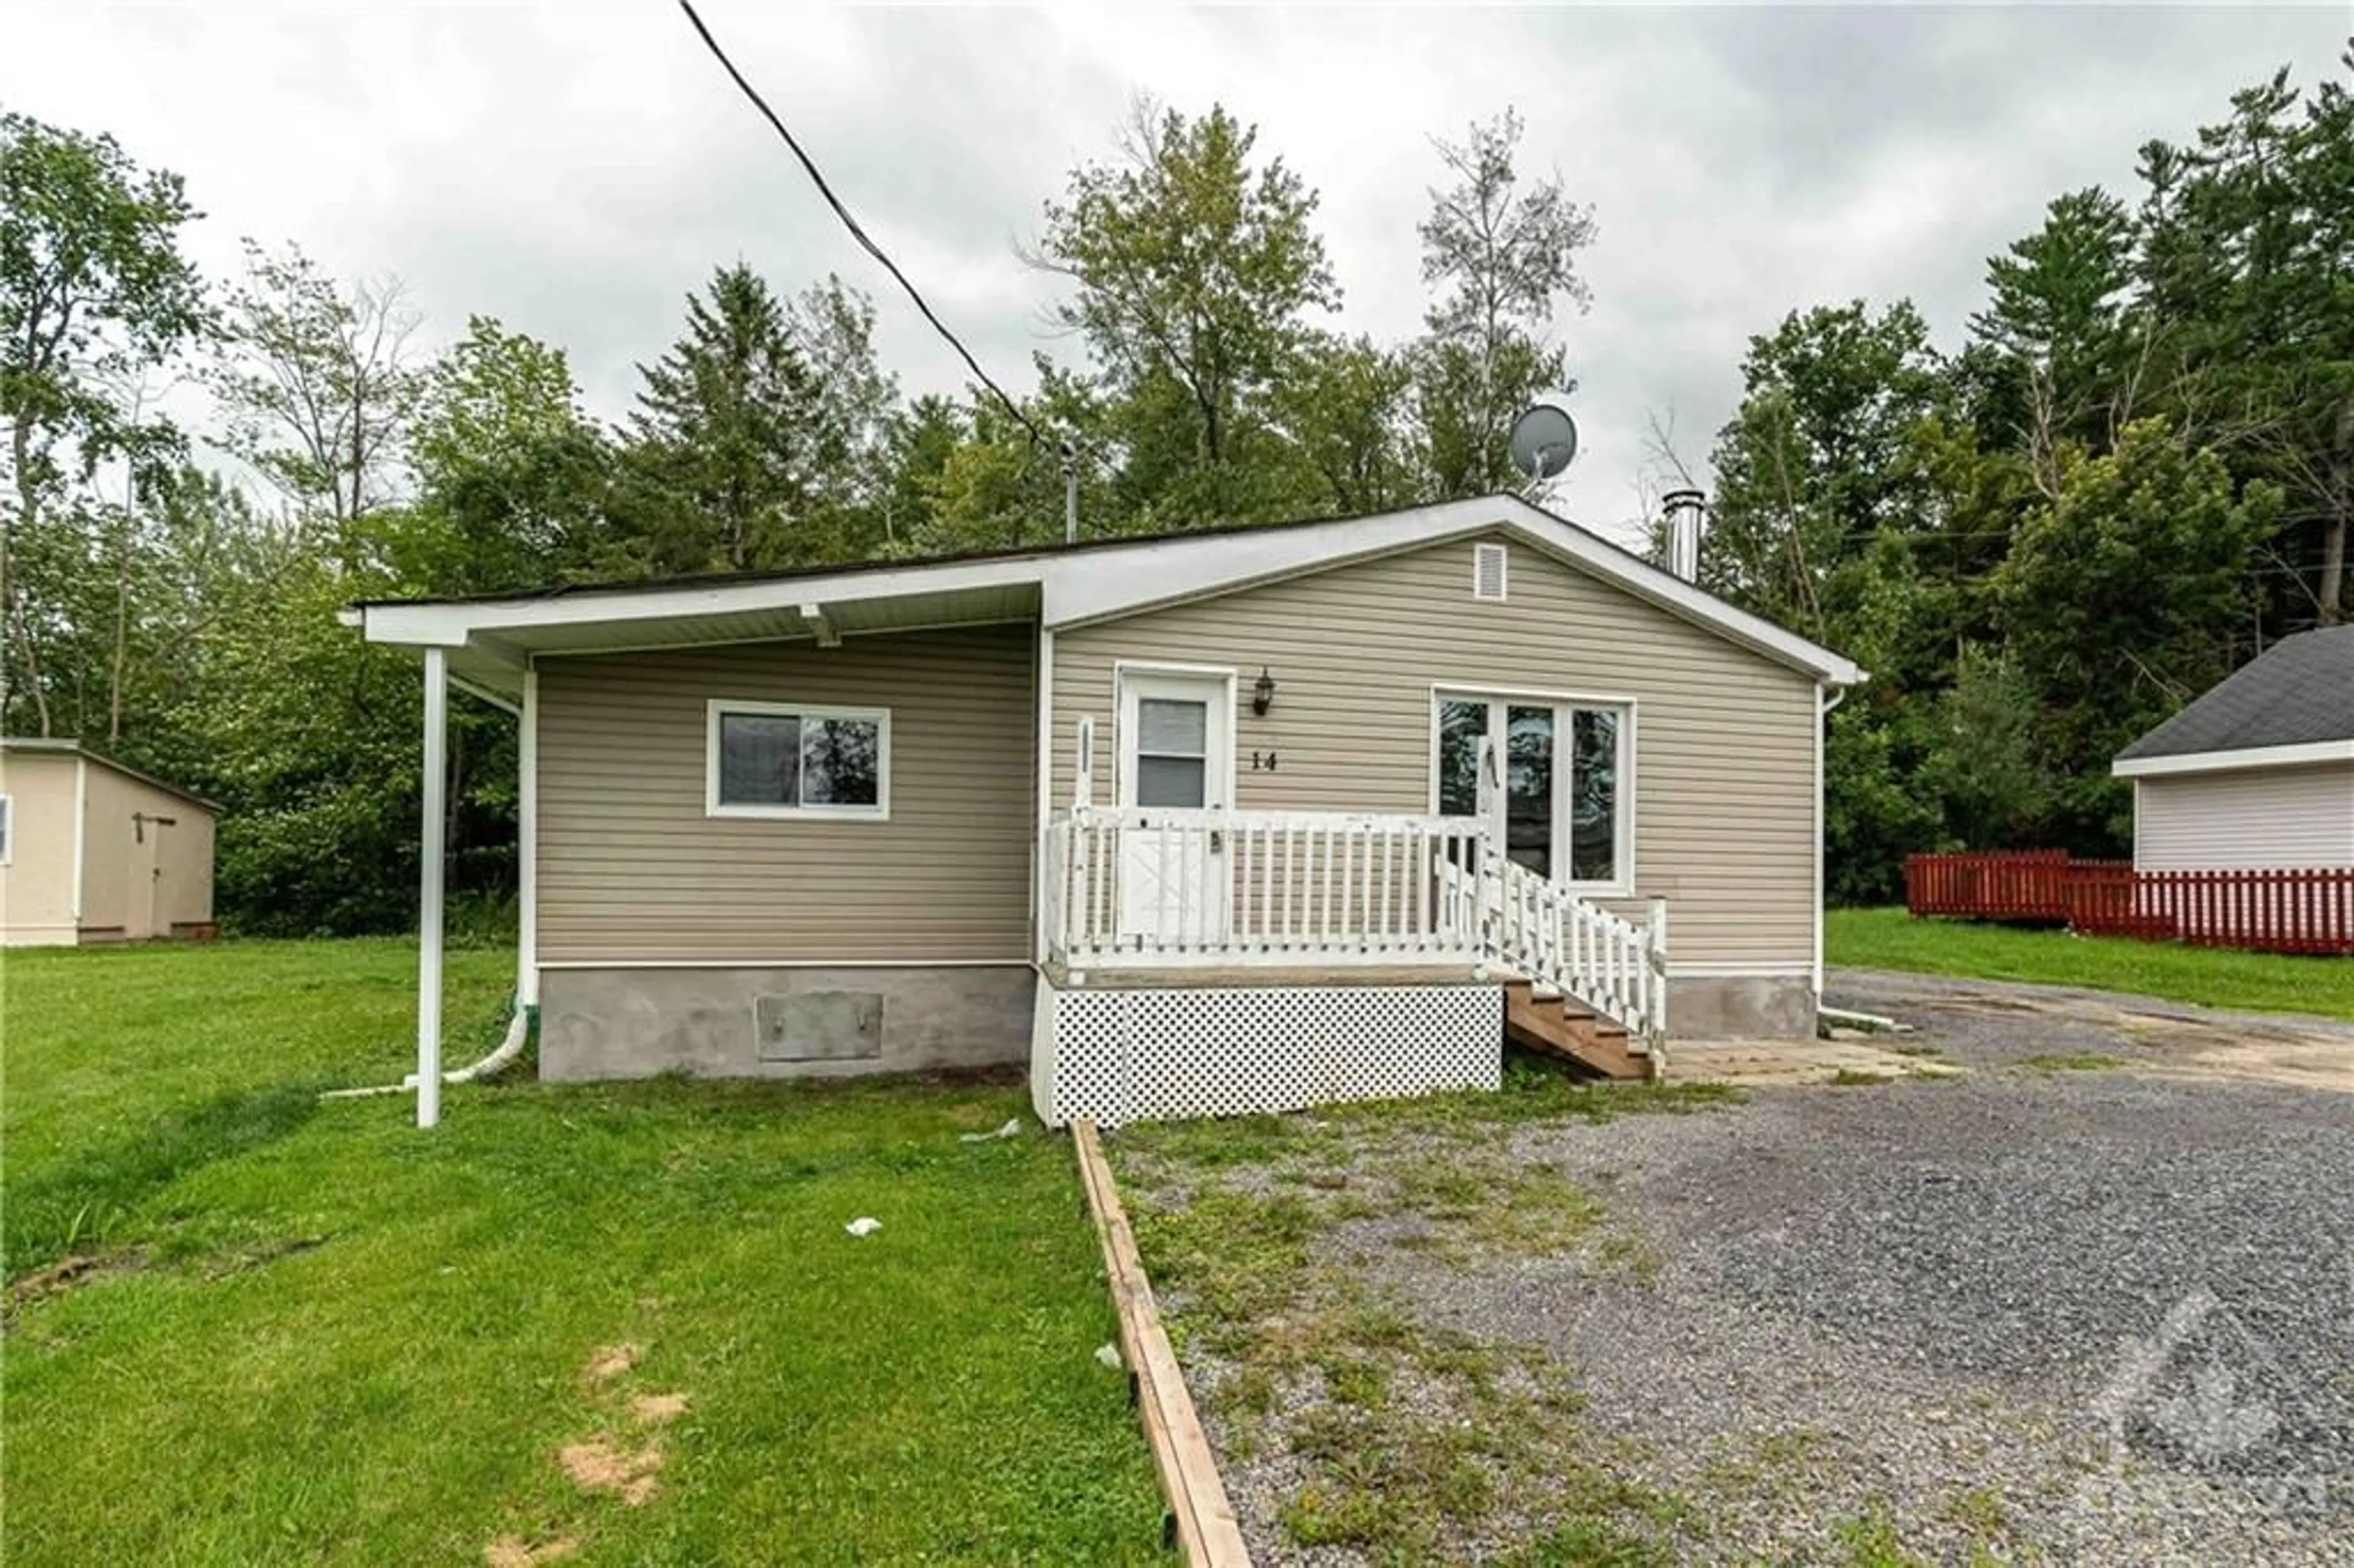 Cottage for 182 DALLAIRE St #14, Rockland Ontario K4K 1K7